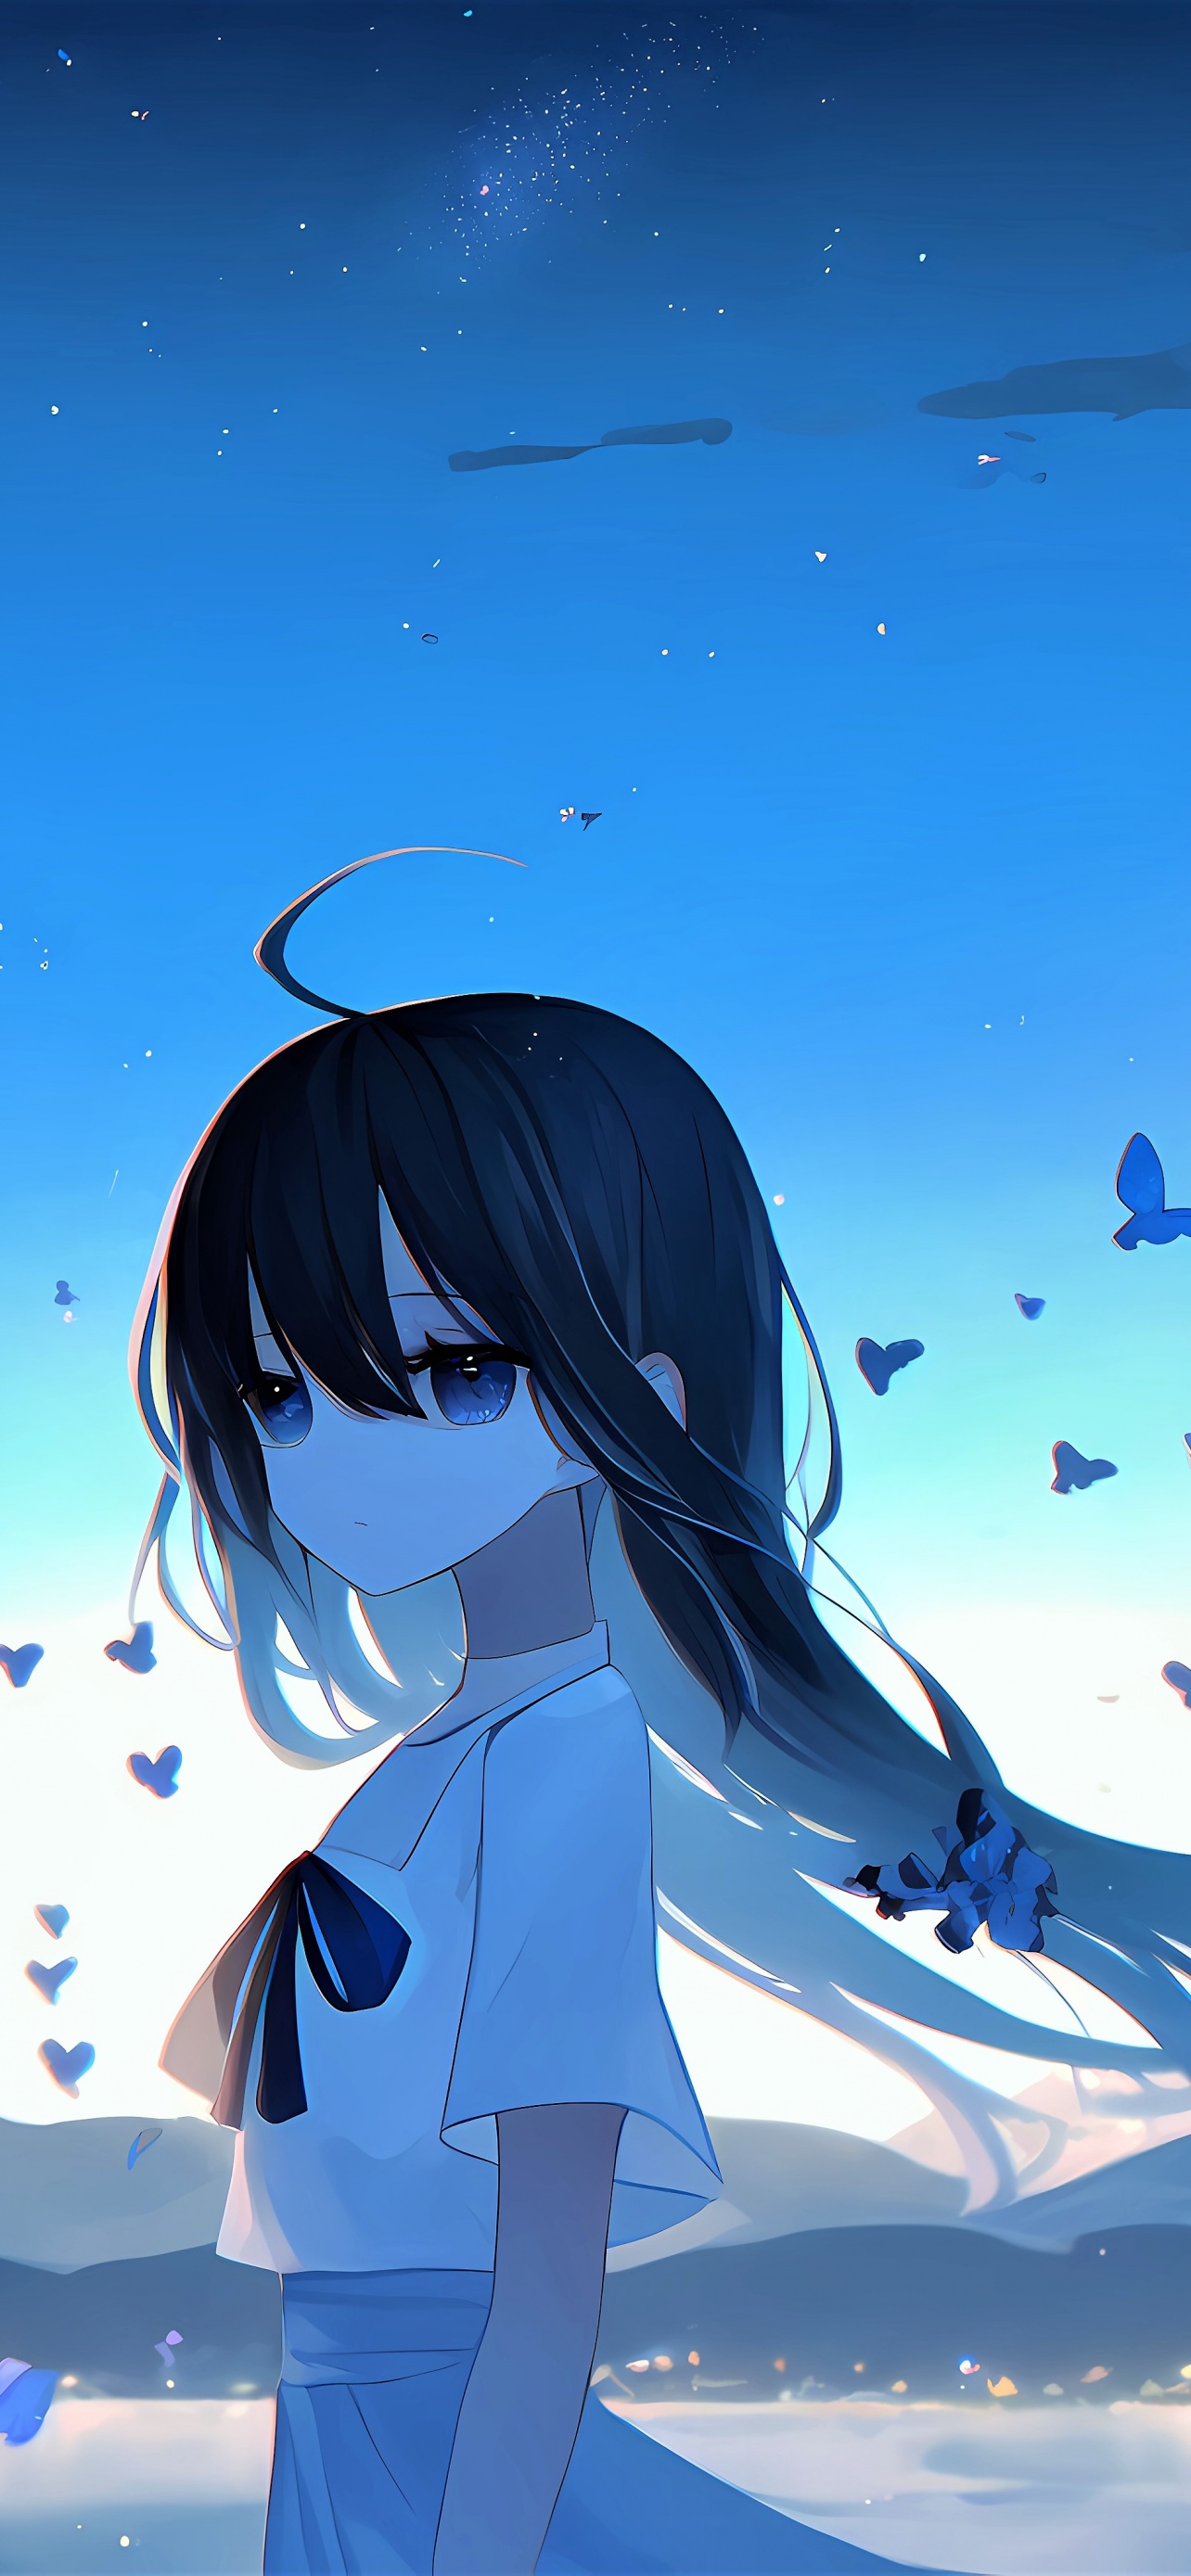 21545 Sad anime  Android iPhone Desktop HD Backgrounds  Wallpapers  1080p 4k HD Wallpapers Desktop Background  Android  iPhone 1080p  4k 1080x1920 2023